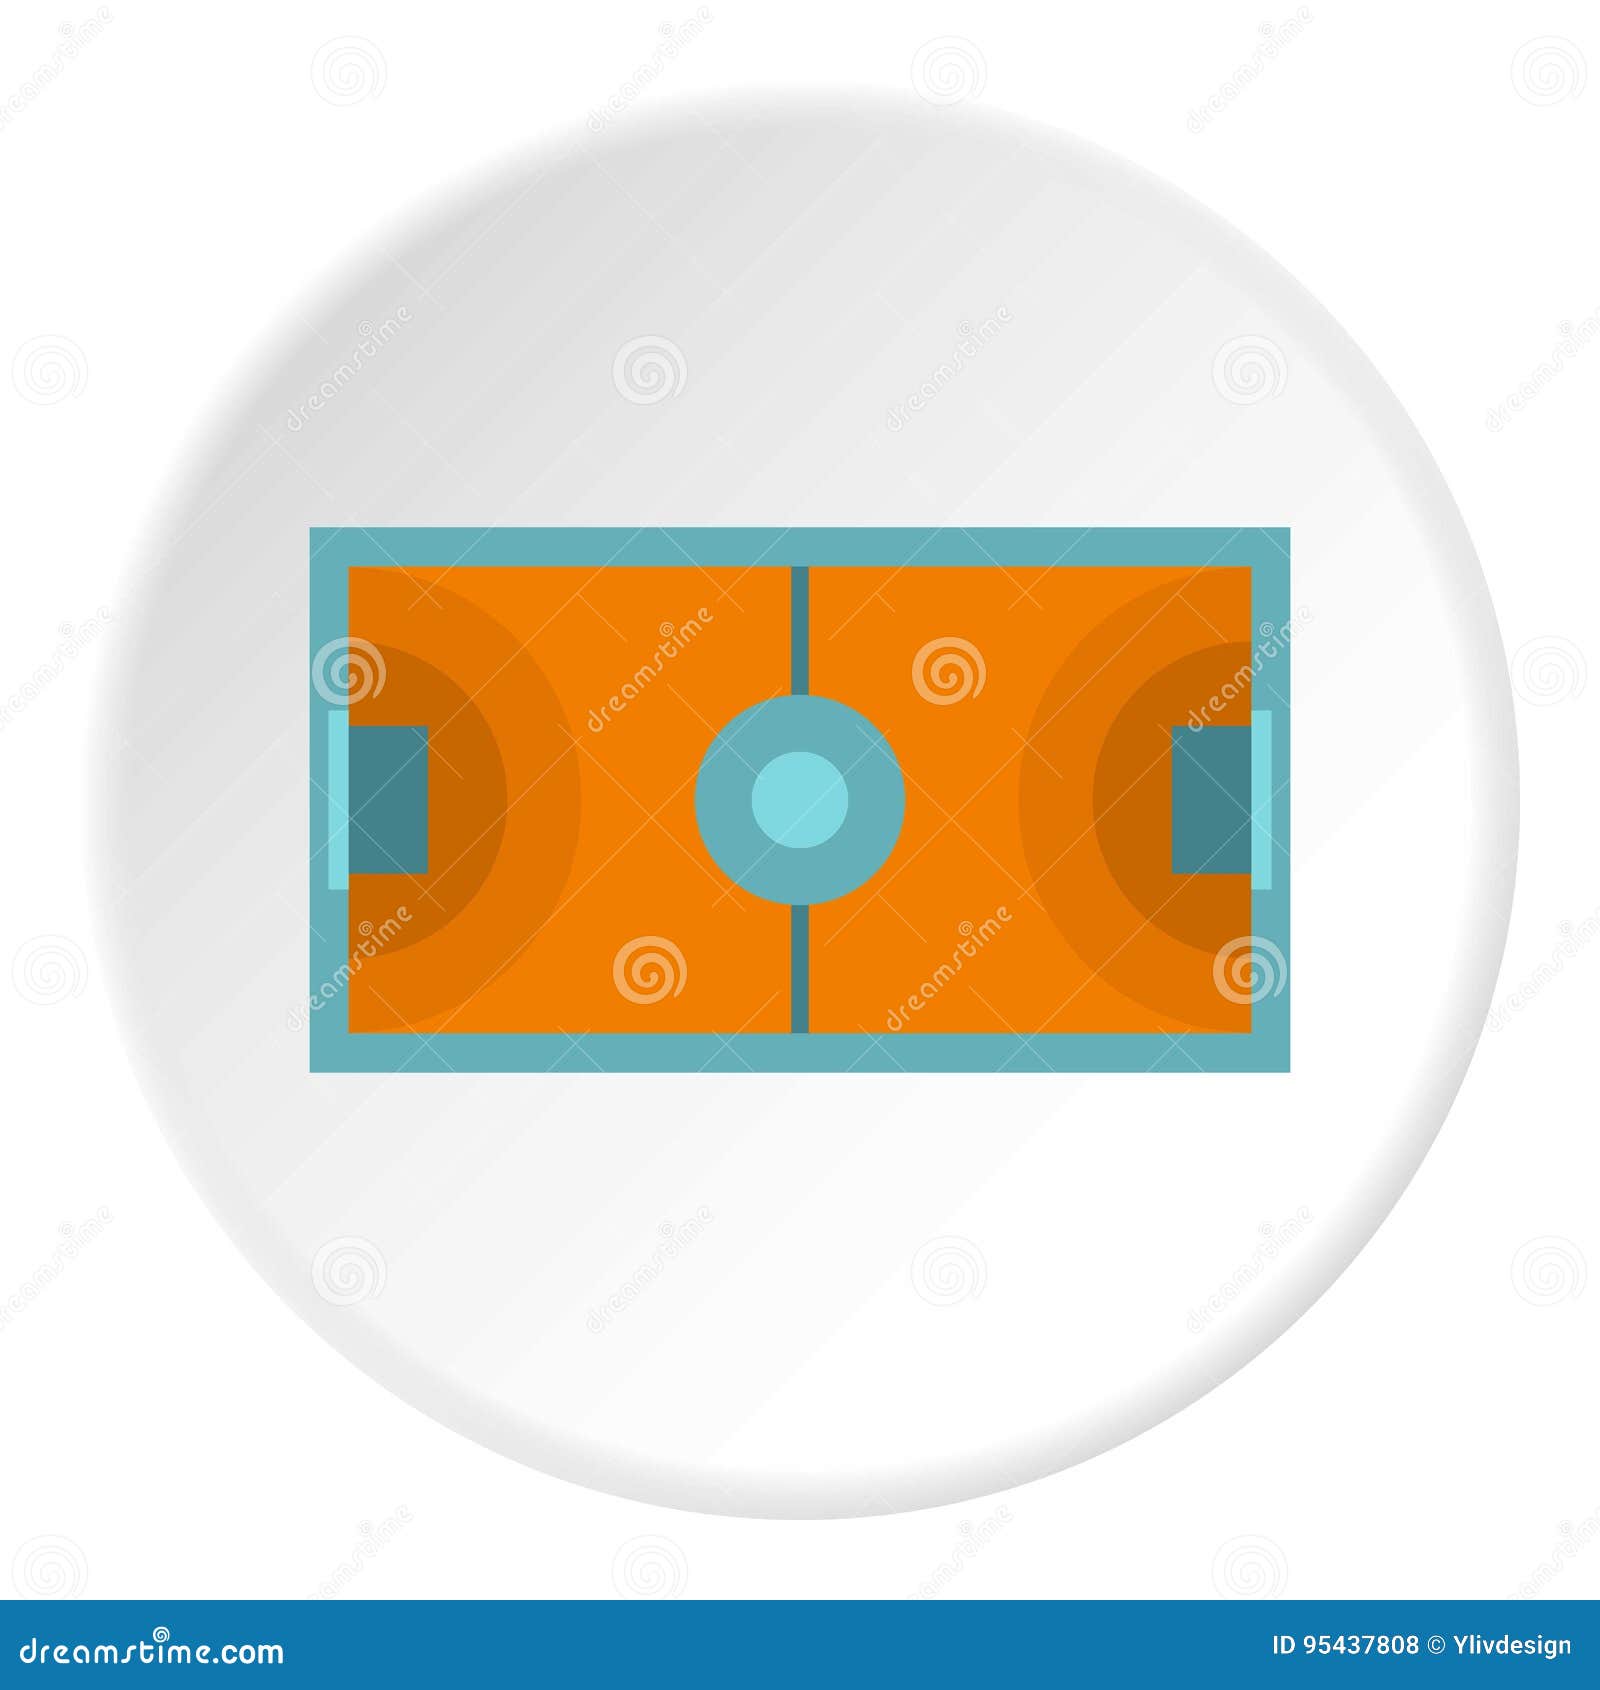 Futsal or indoor soccer field icon circle. Futsal or indoor soccer field icon in flat circle isolated vector illustration for web